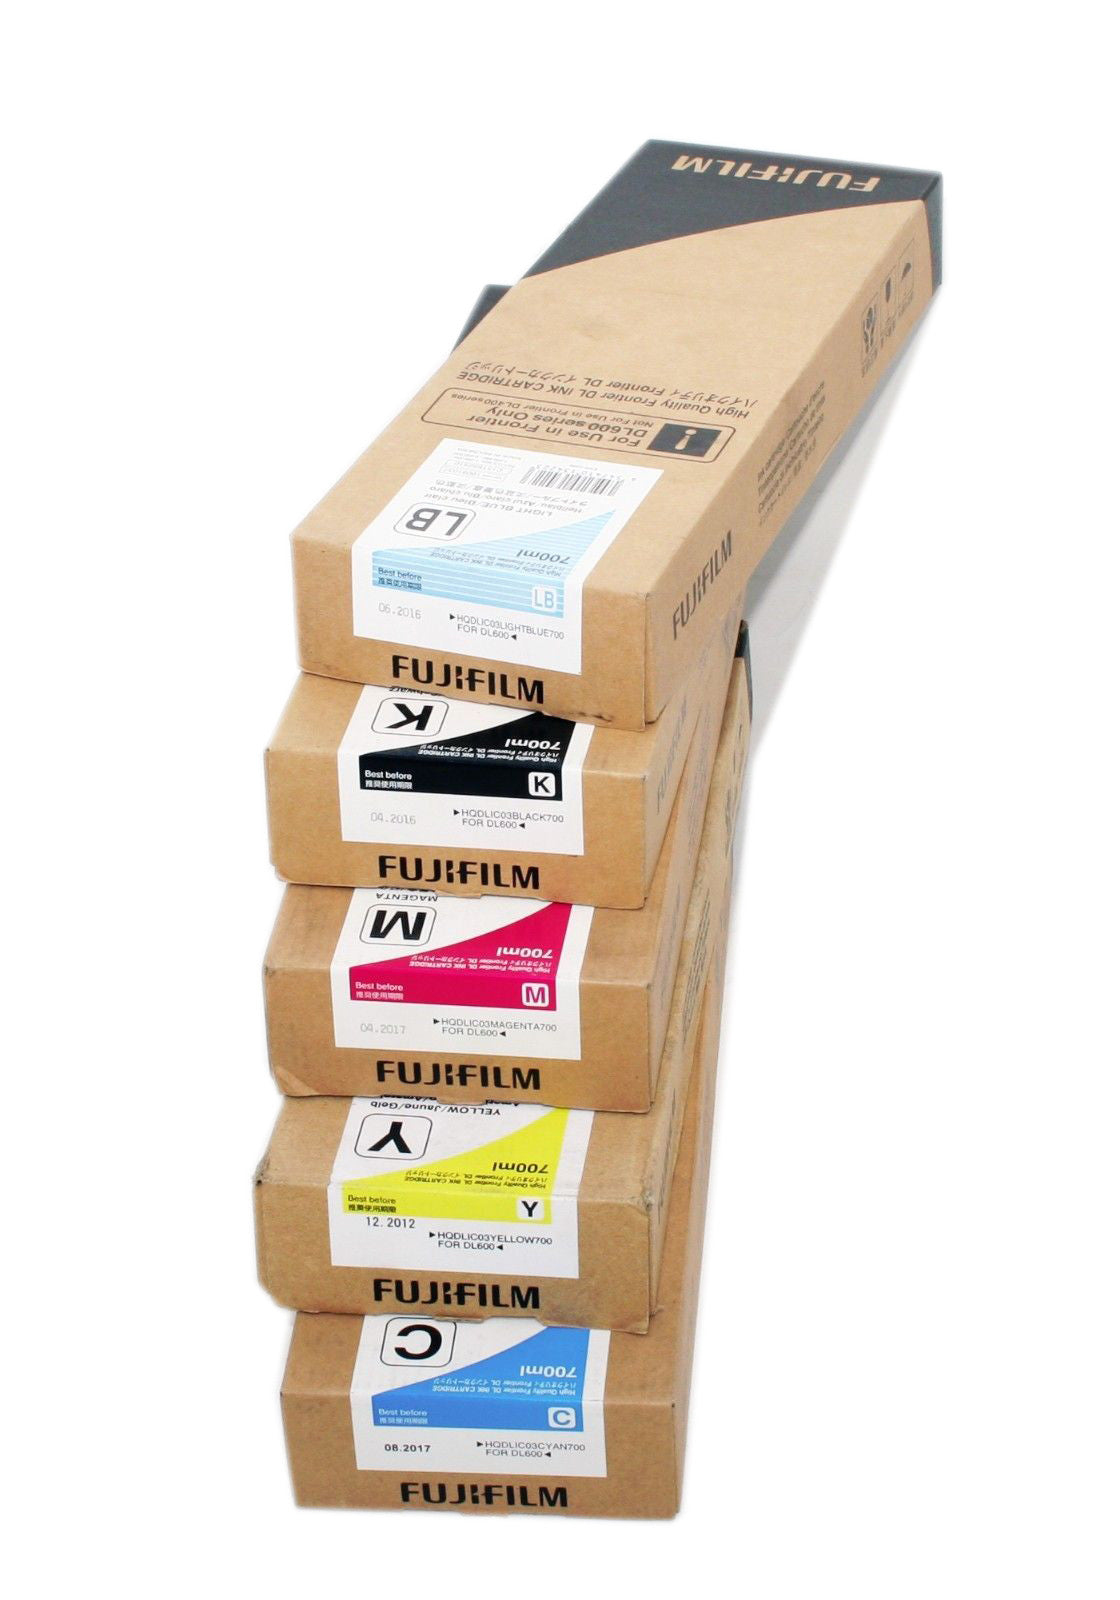 FujiFilm DL600 Ink Cartridges - 700ml for Frontier DL600 (Set of 5) "NEW"